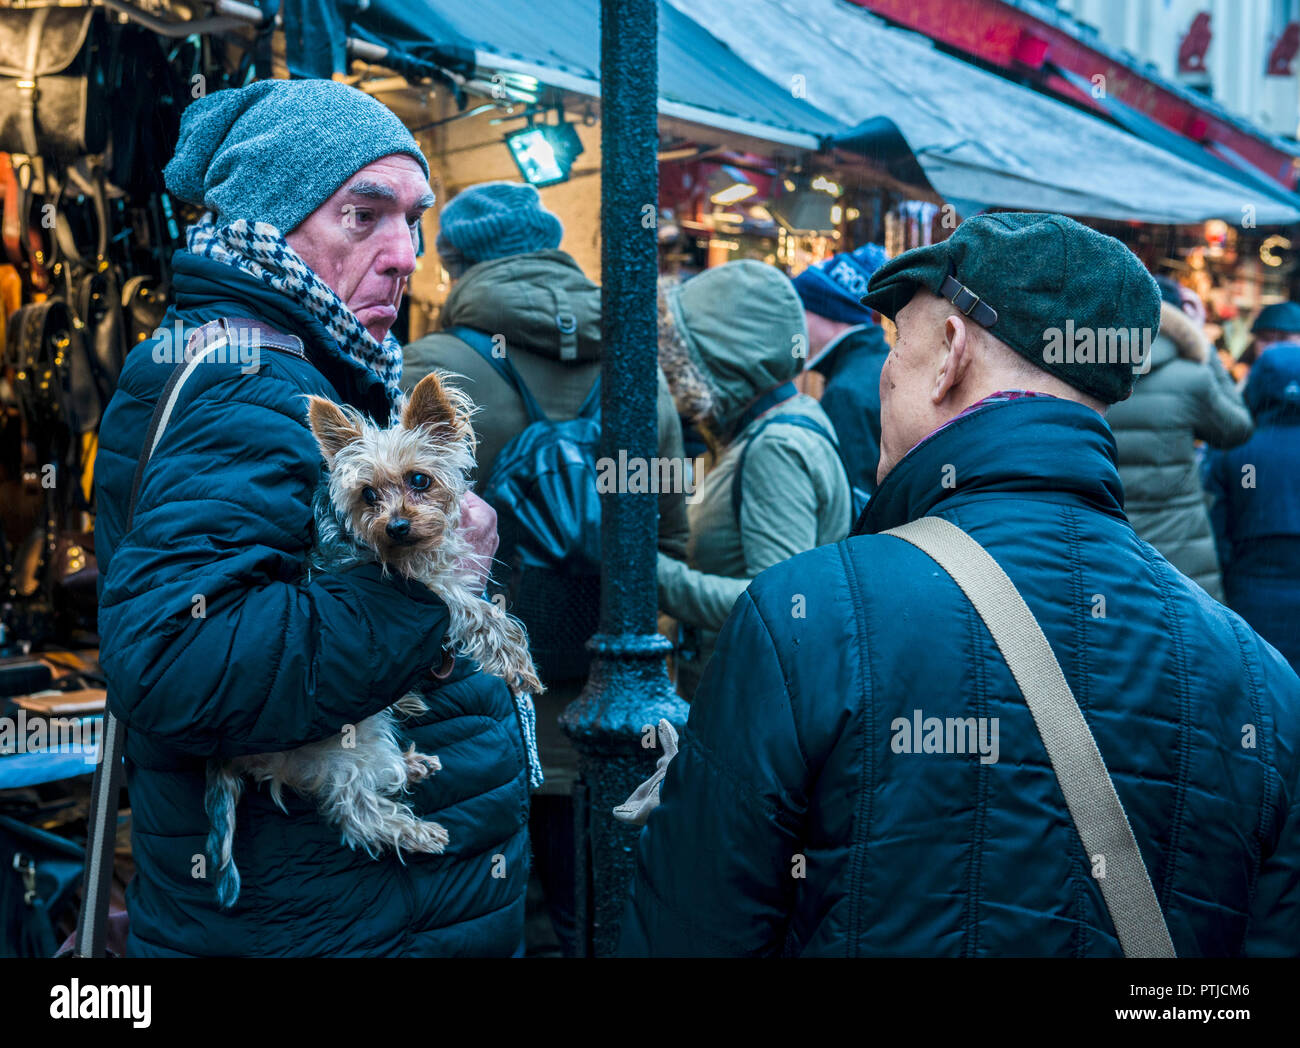 Two men face to face with one holding a dog. Stock Photo